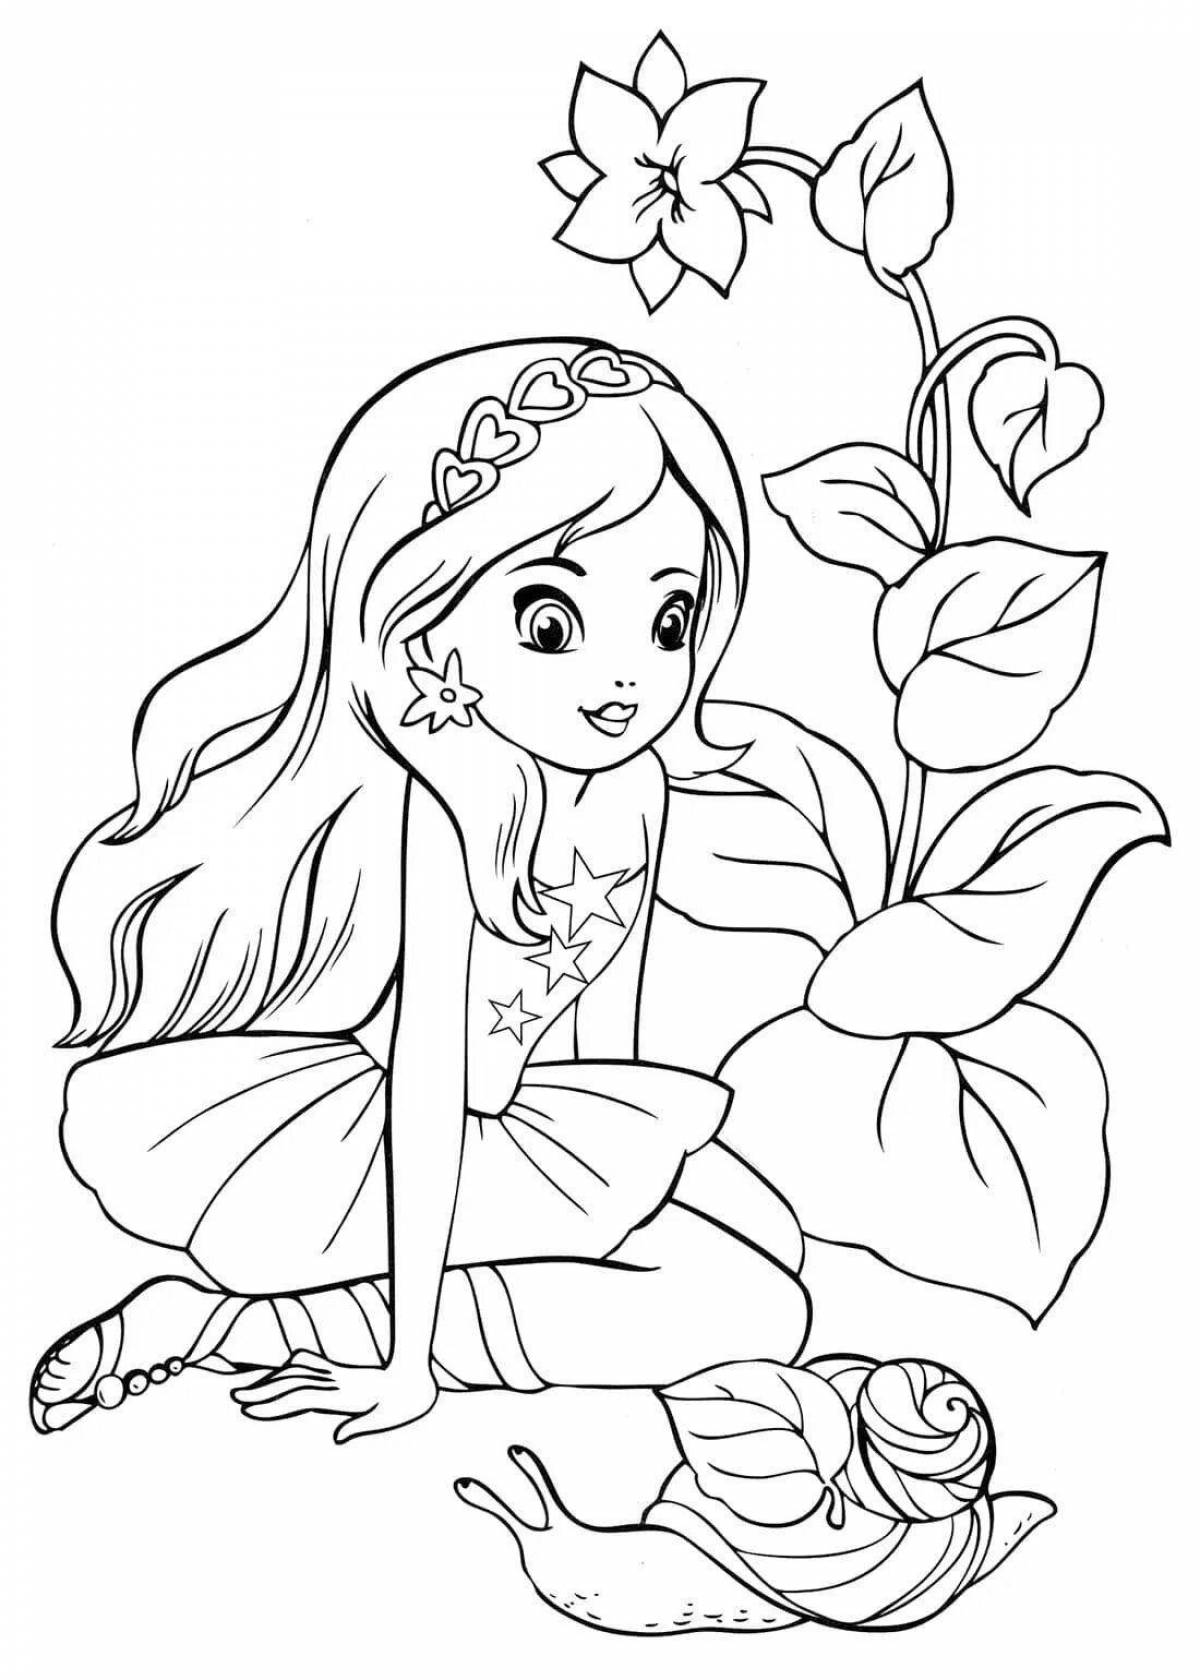 Glorious coloring book for girls 6-7 years old